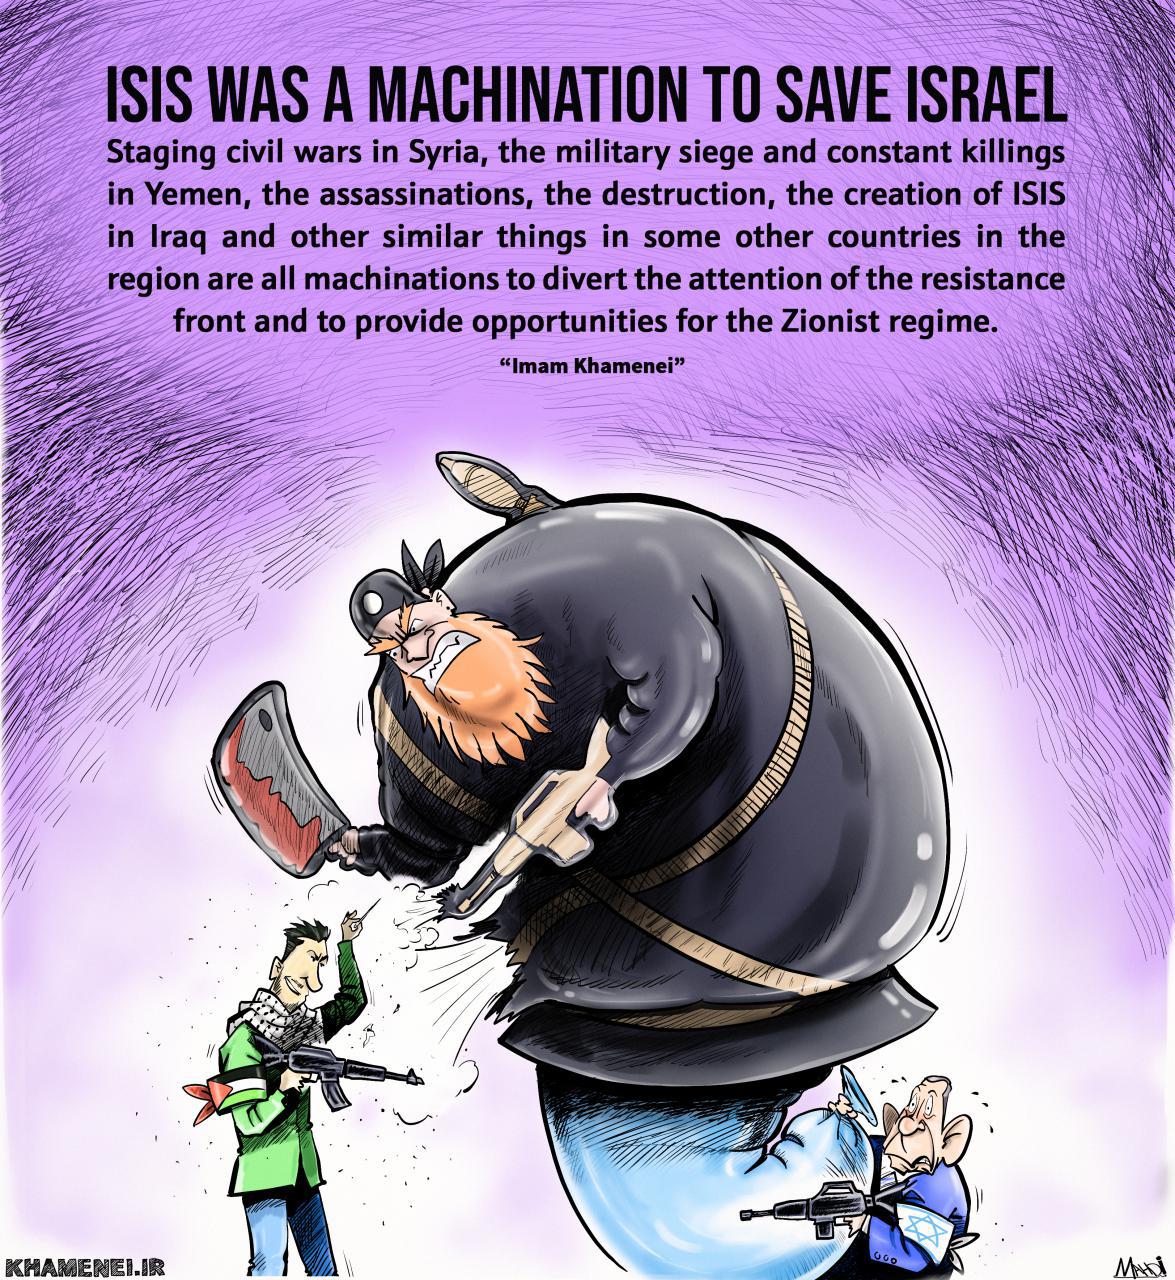 ISIS was a machination to save Israel